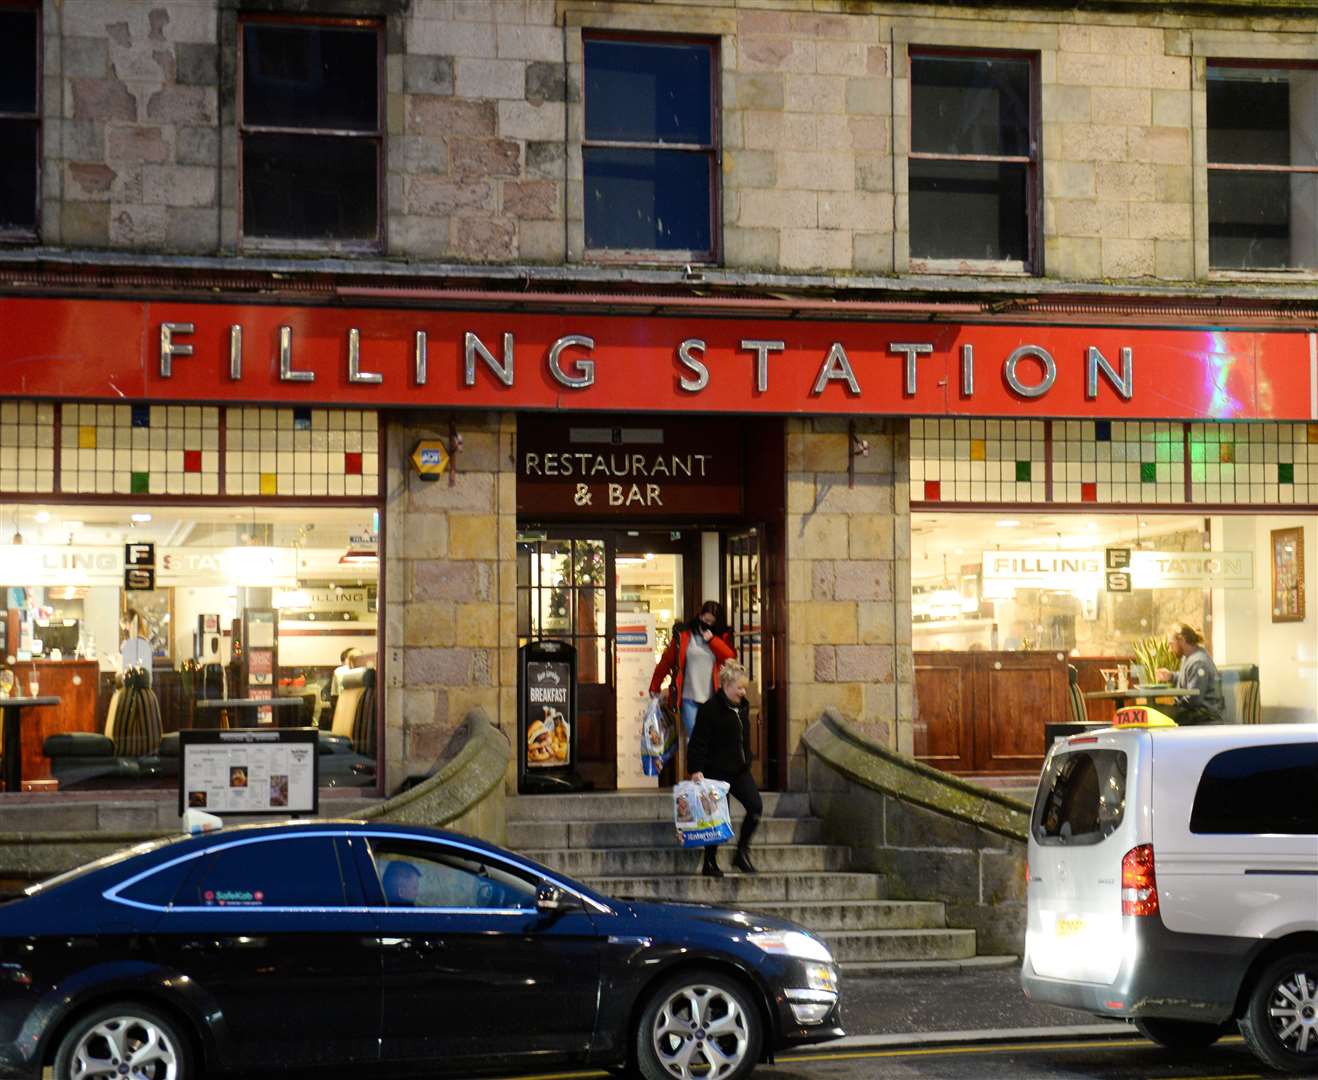 People have happy memories of the Filling Station from years gone by.